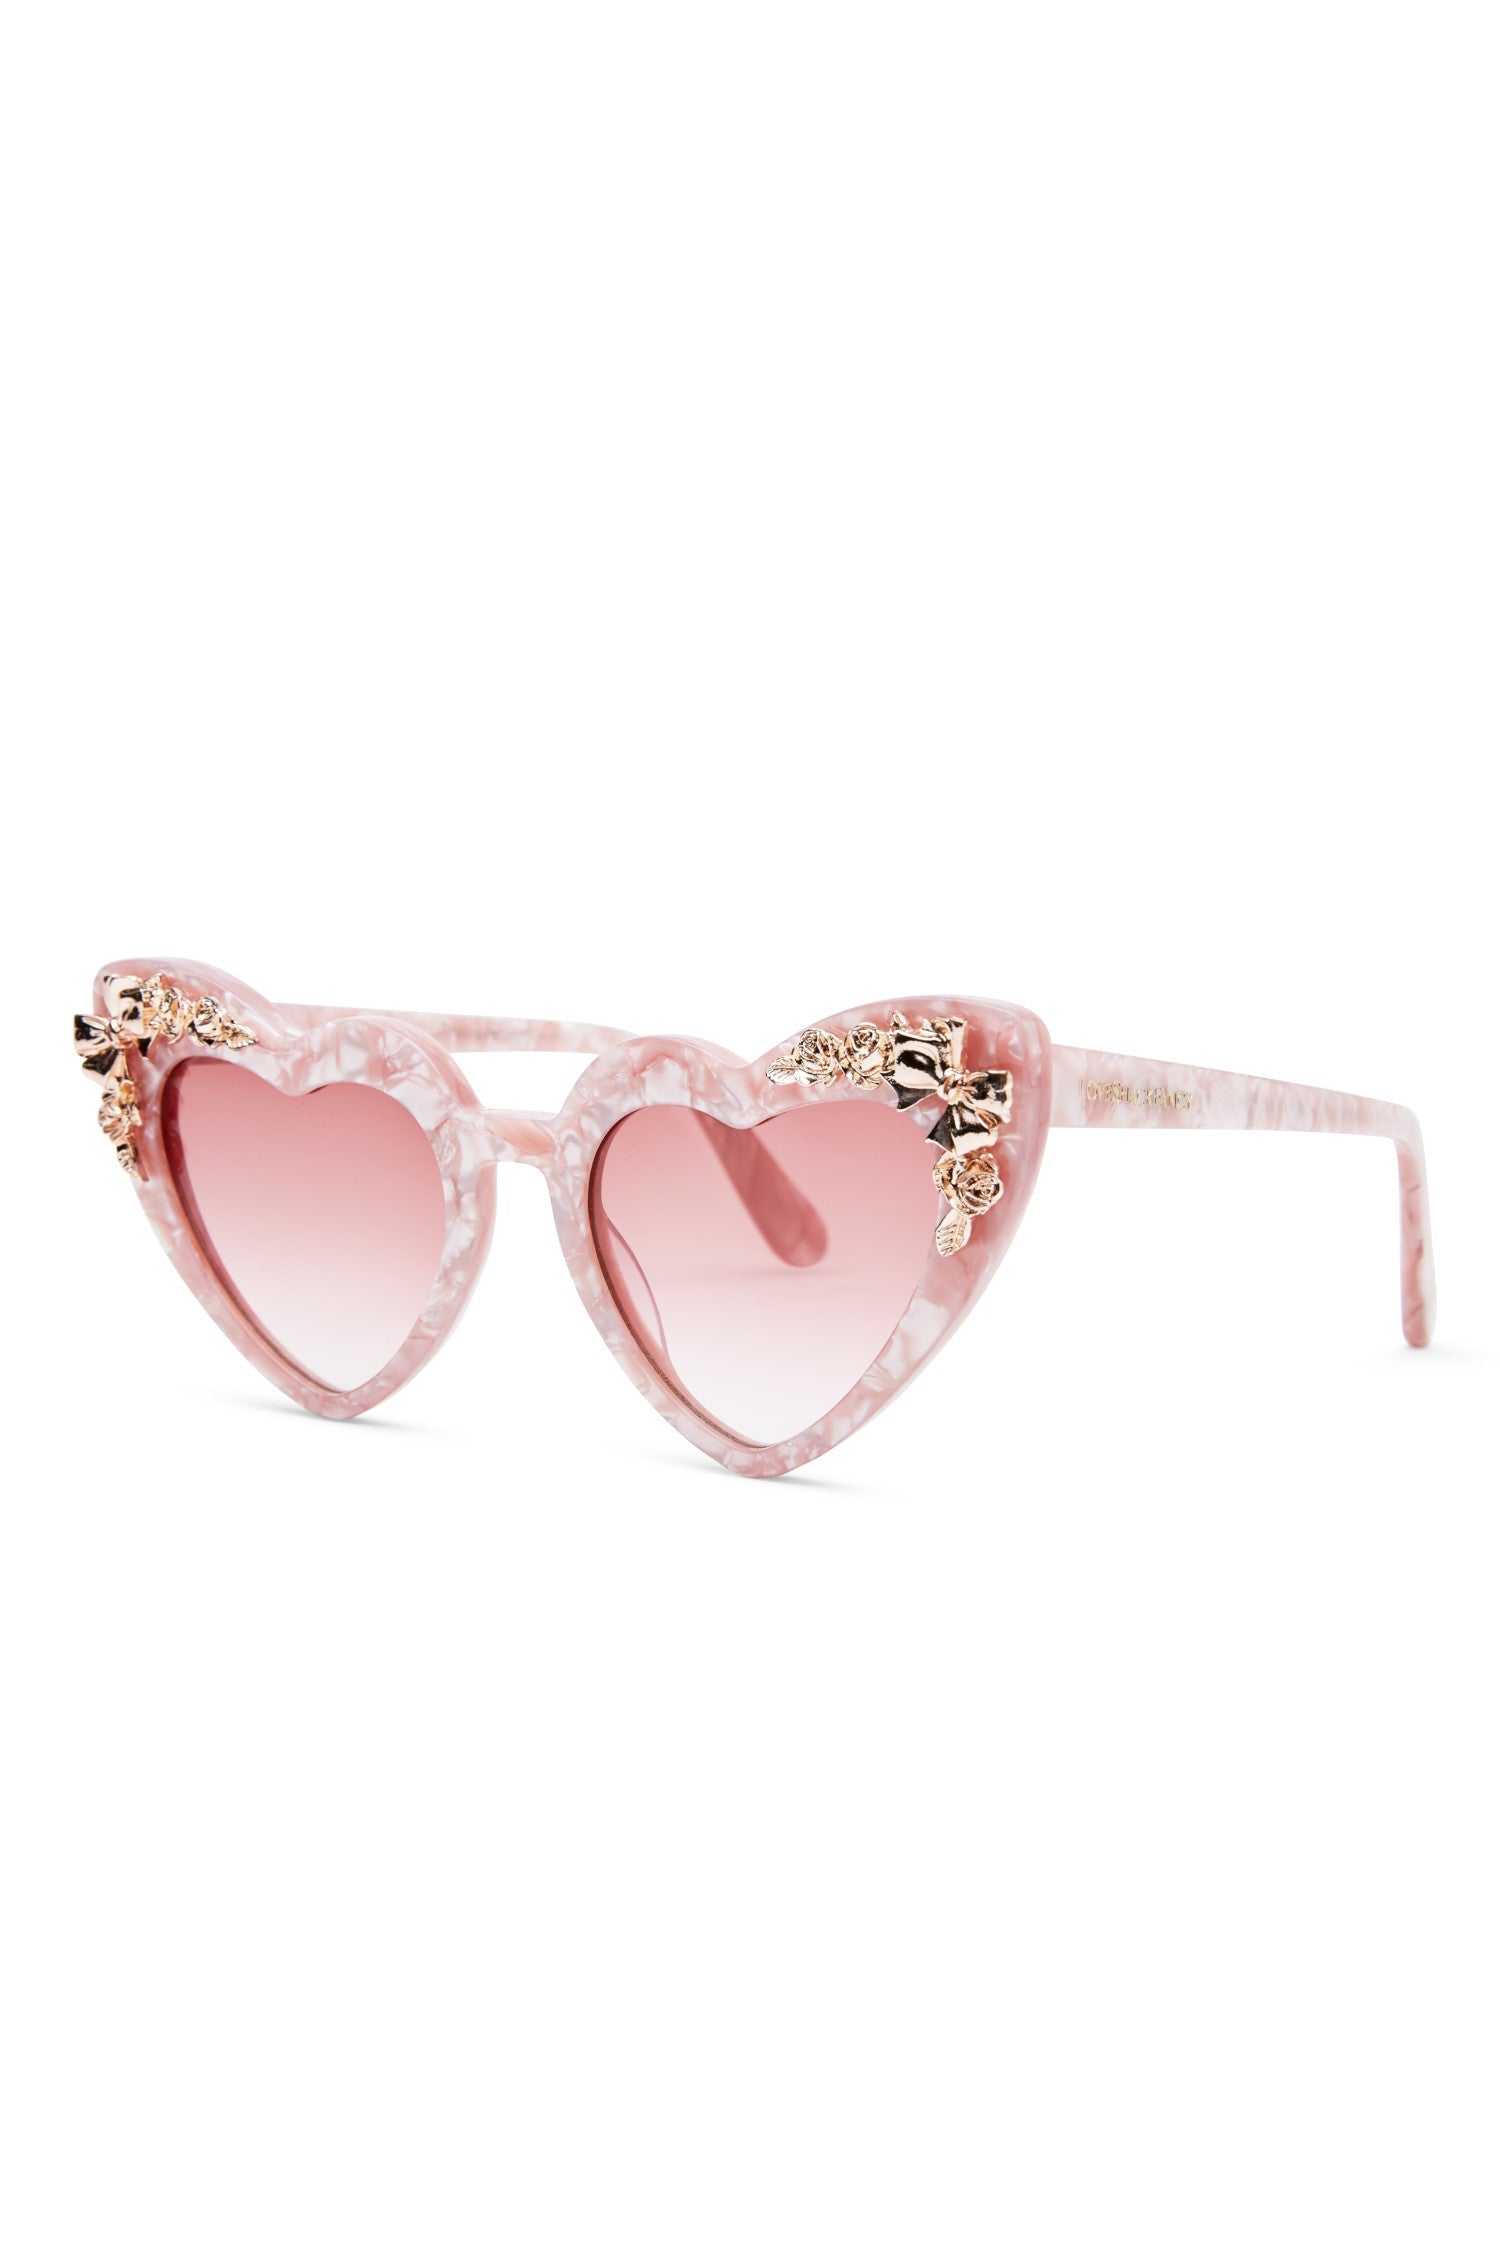 Womens heart shaped icy rose sunglasses with gem detail.